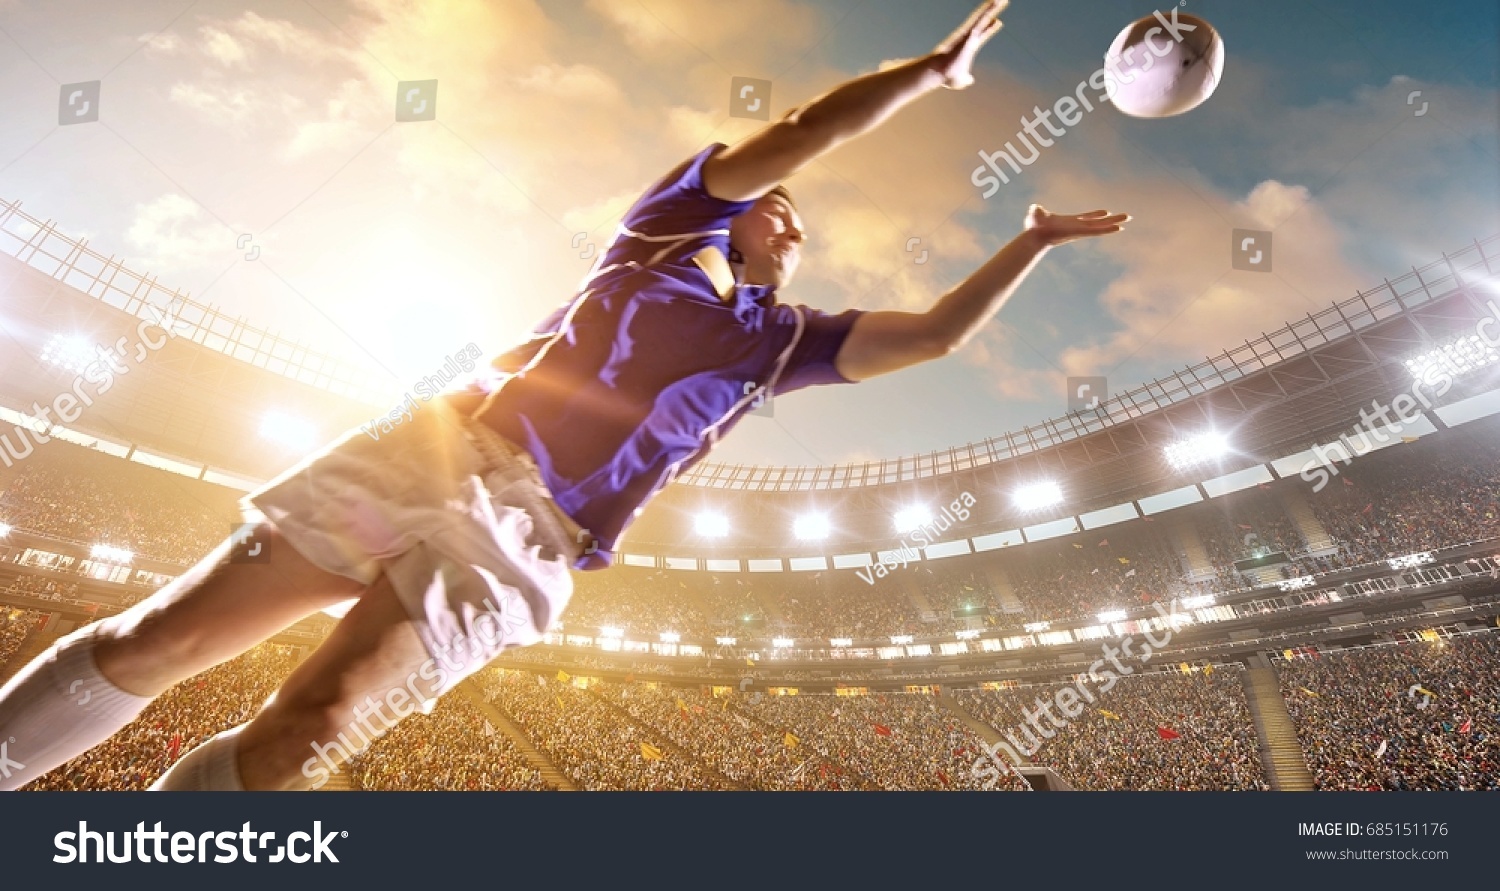 Professional rugby player jumps with a ball on a professional sports arena with bleaches full of people. Arena and people on it are made in 3D.
 #685151176